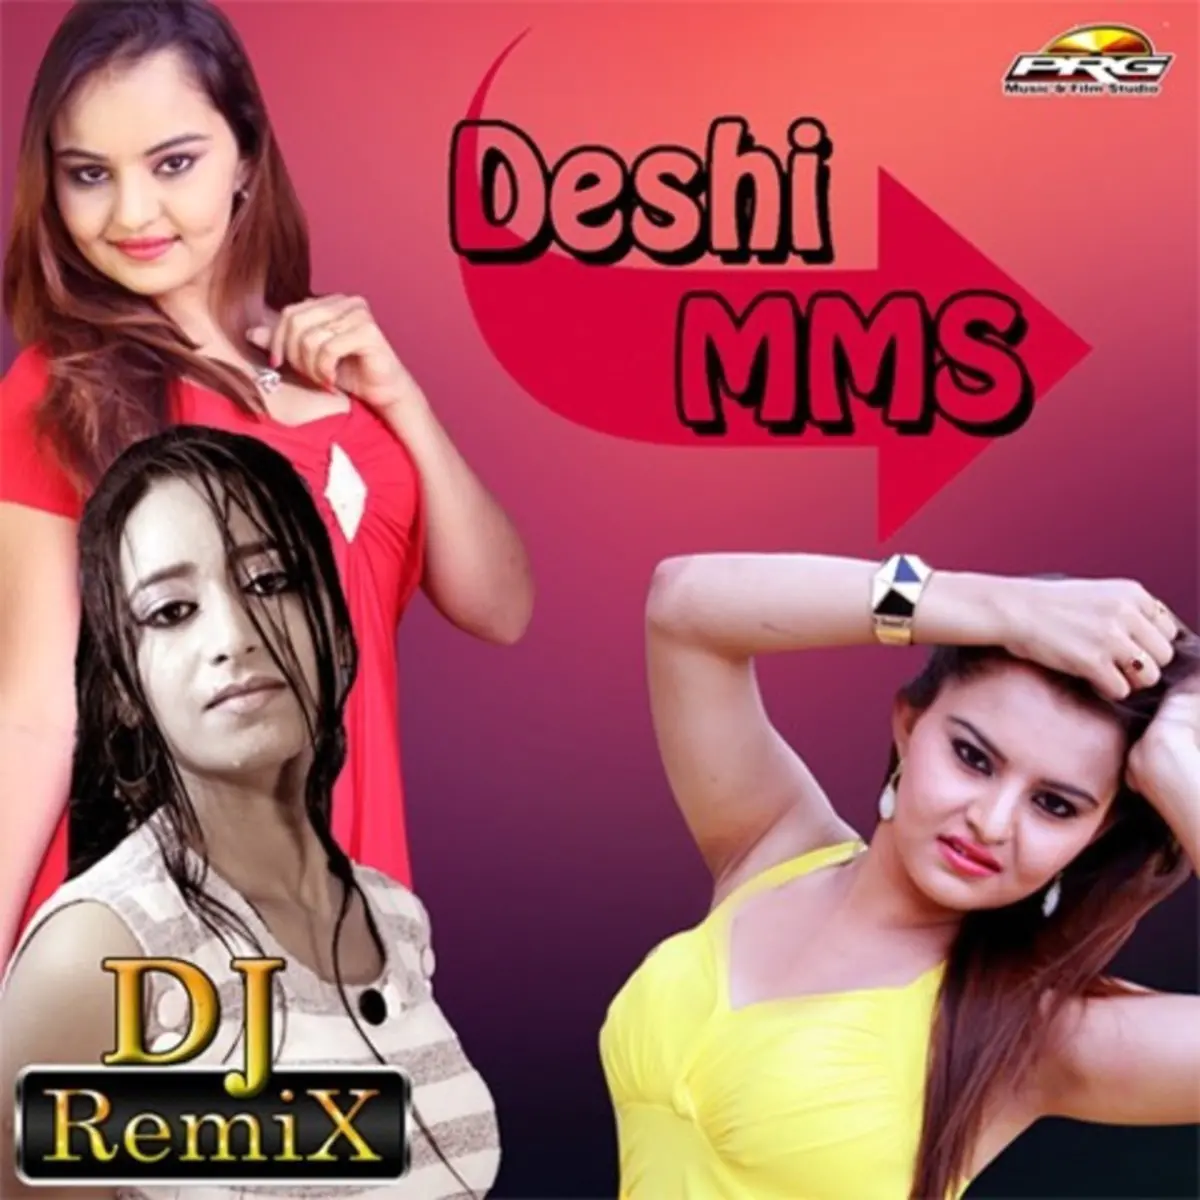 Deshi Mms Rajasthani Dj Remix Songs Songs Download Deshi Mms Rajasthani Dj Remix Songs Mp3 Rajasthani Songs Online Free On Gaana Com Are you see now top 20 rajasthani remix results on the my free mp3 website. deshi mms rajasthani dj remix songs